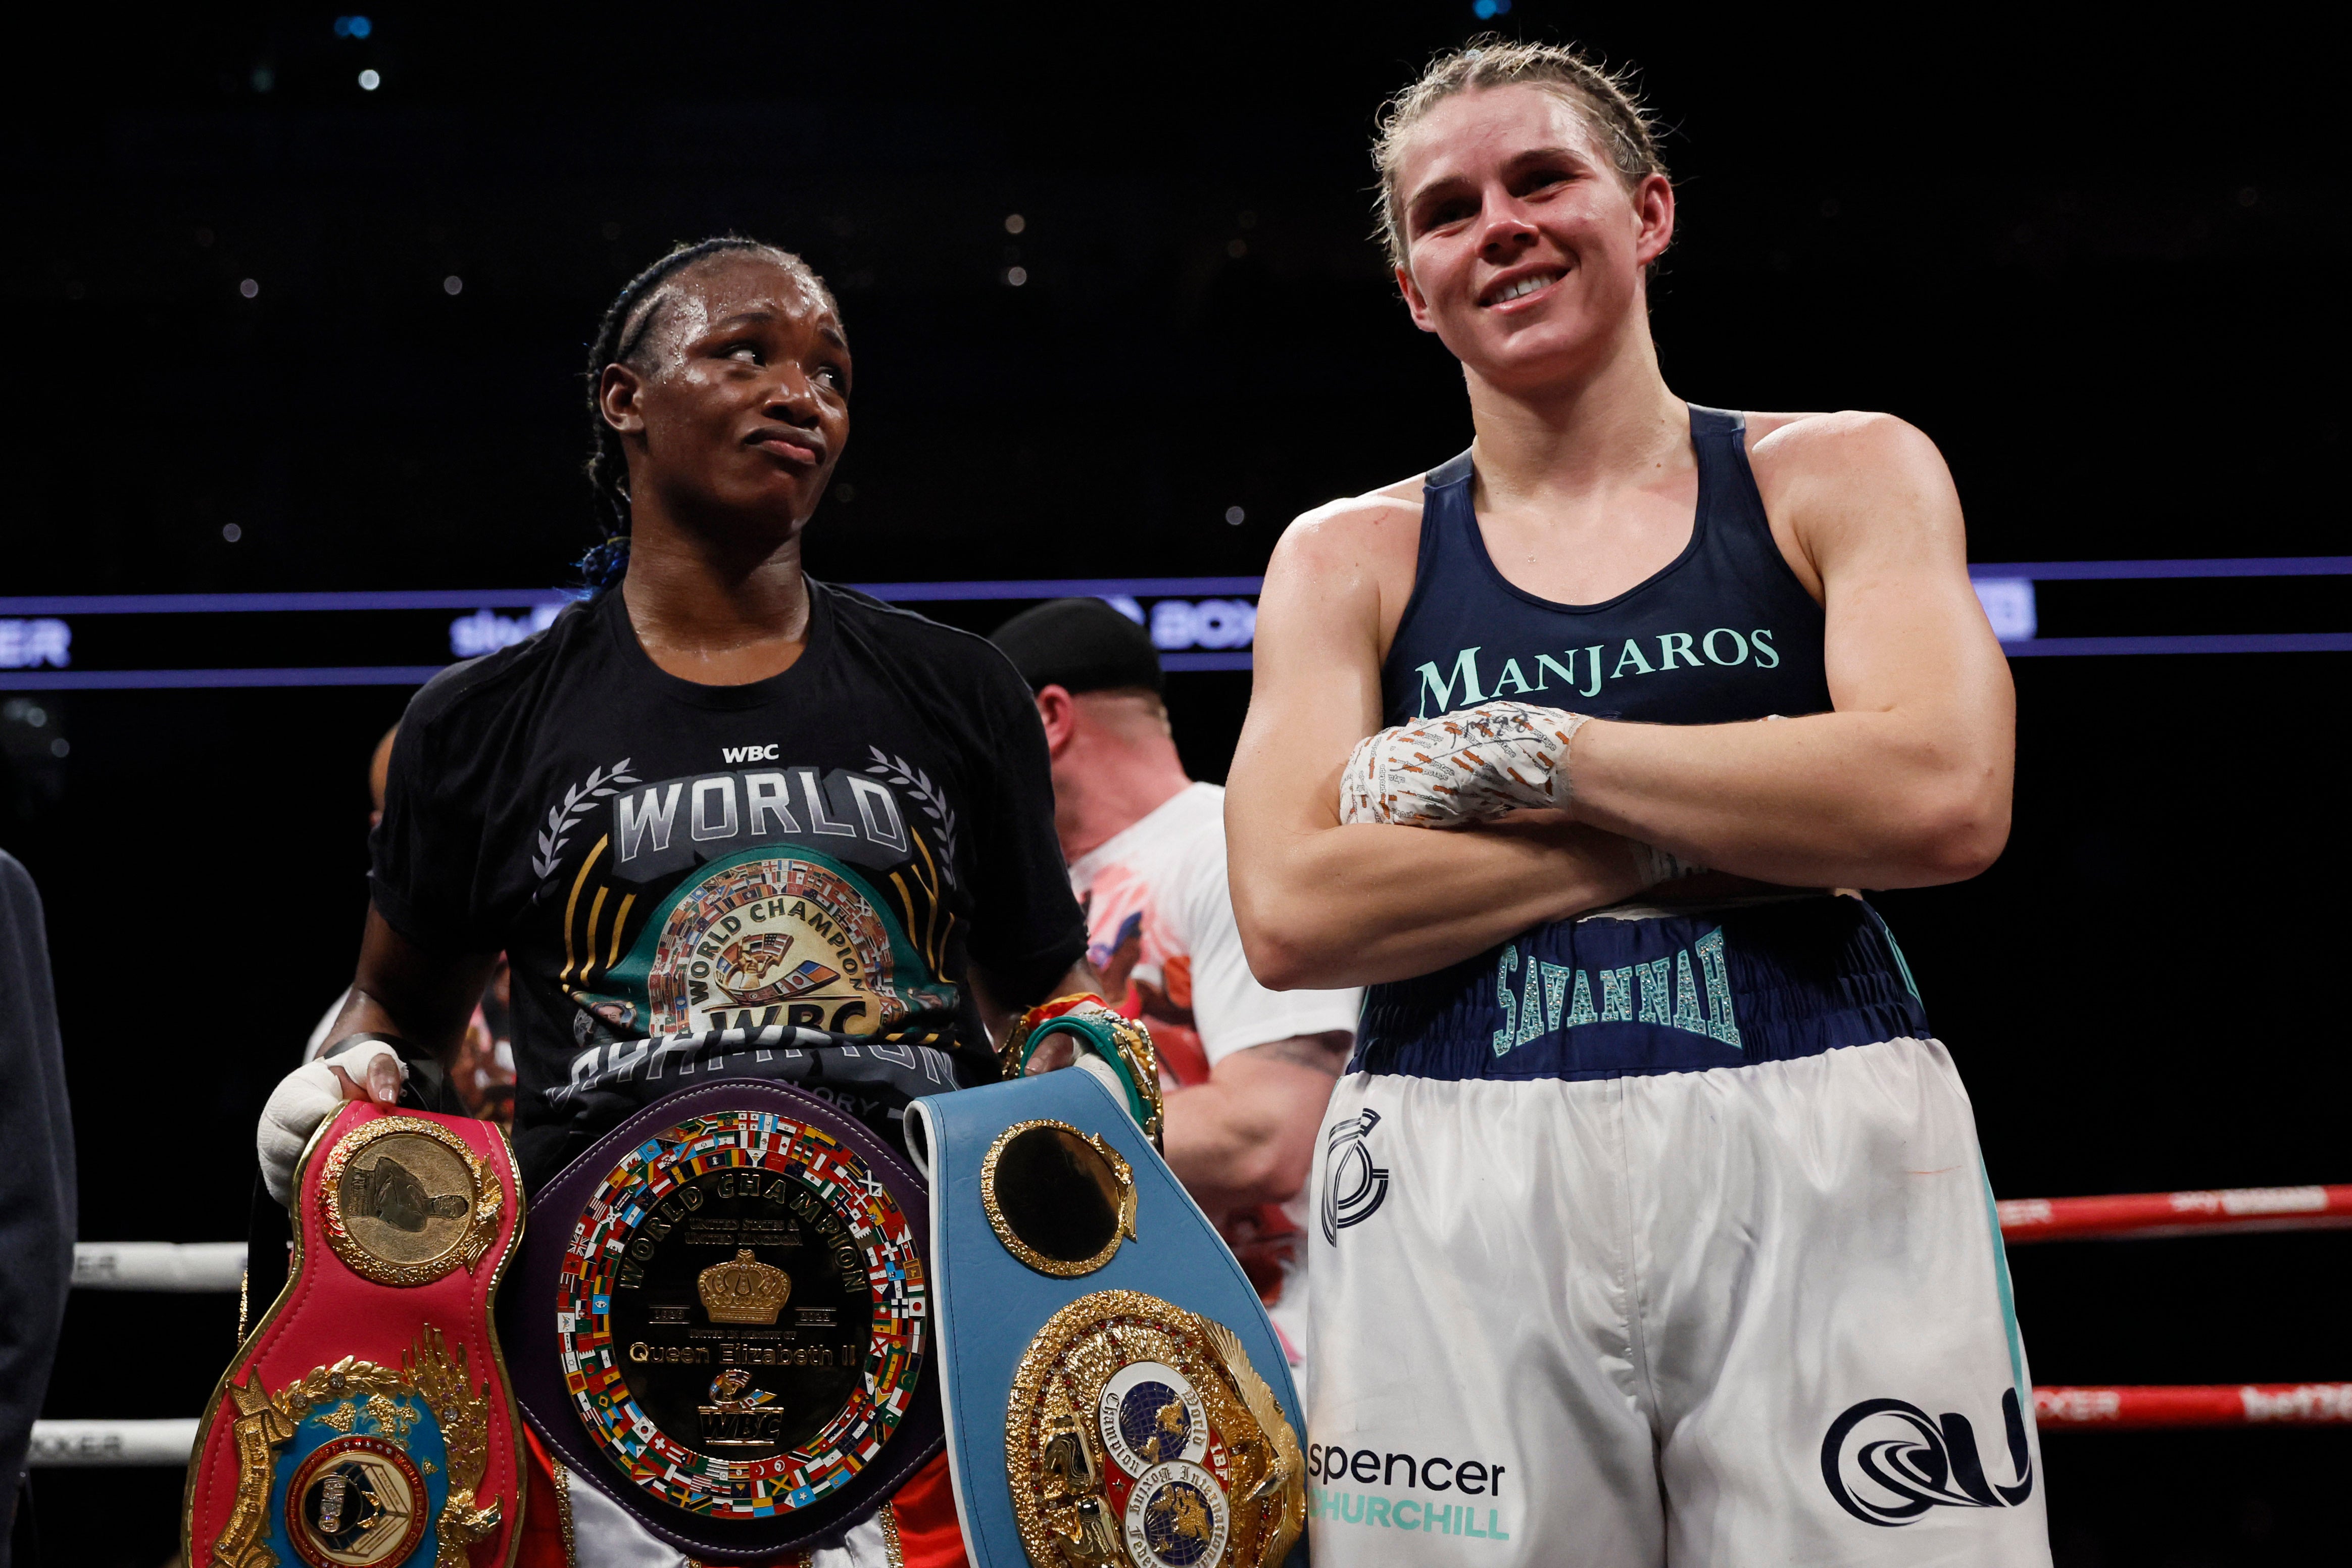 Claressa Shields vs Savannah Marshall will be fondly remembered as the greatest night in the history of women’s boxing on these shores